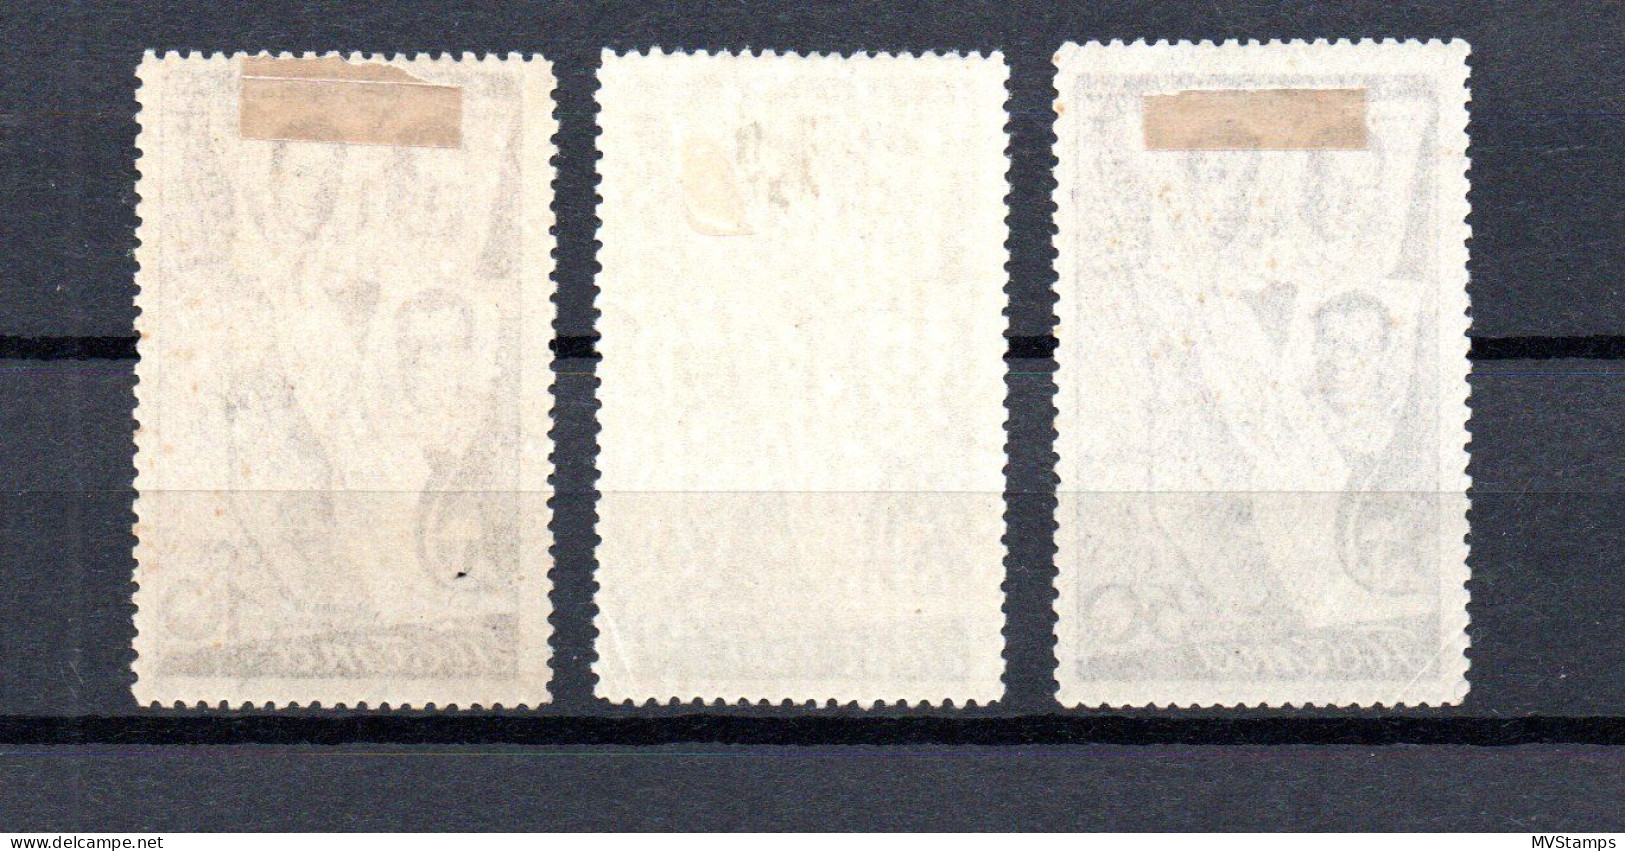 Russia 1938 Old Set Polar-Flight Moscow-San Jacinto Stamps (Michel 599/601) MLH - Neufs